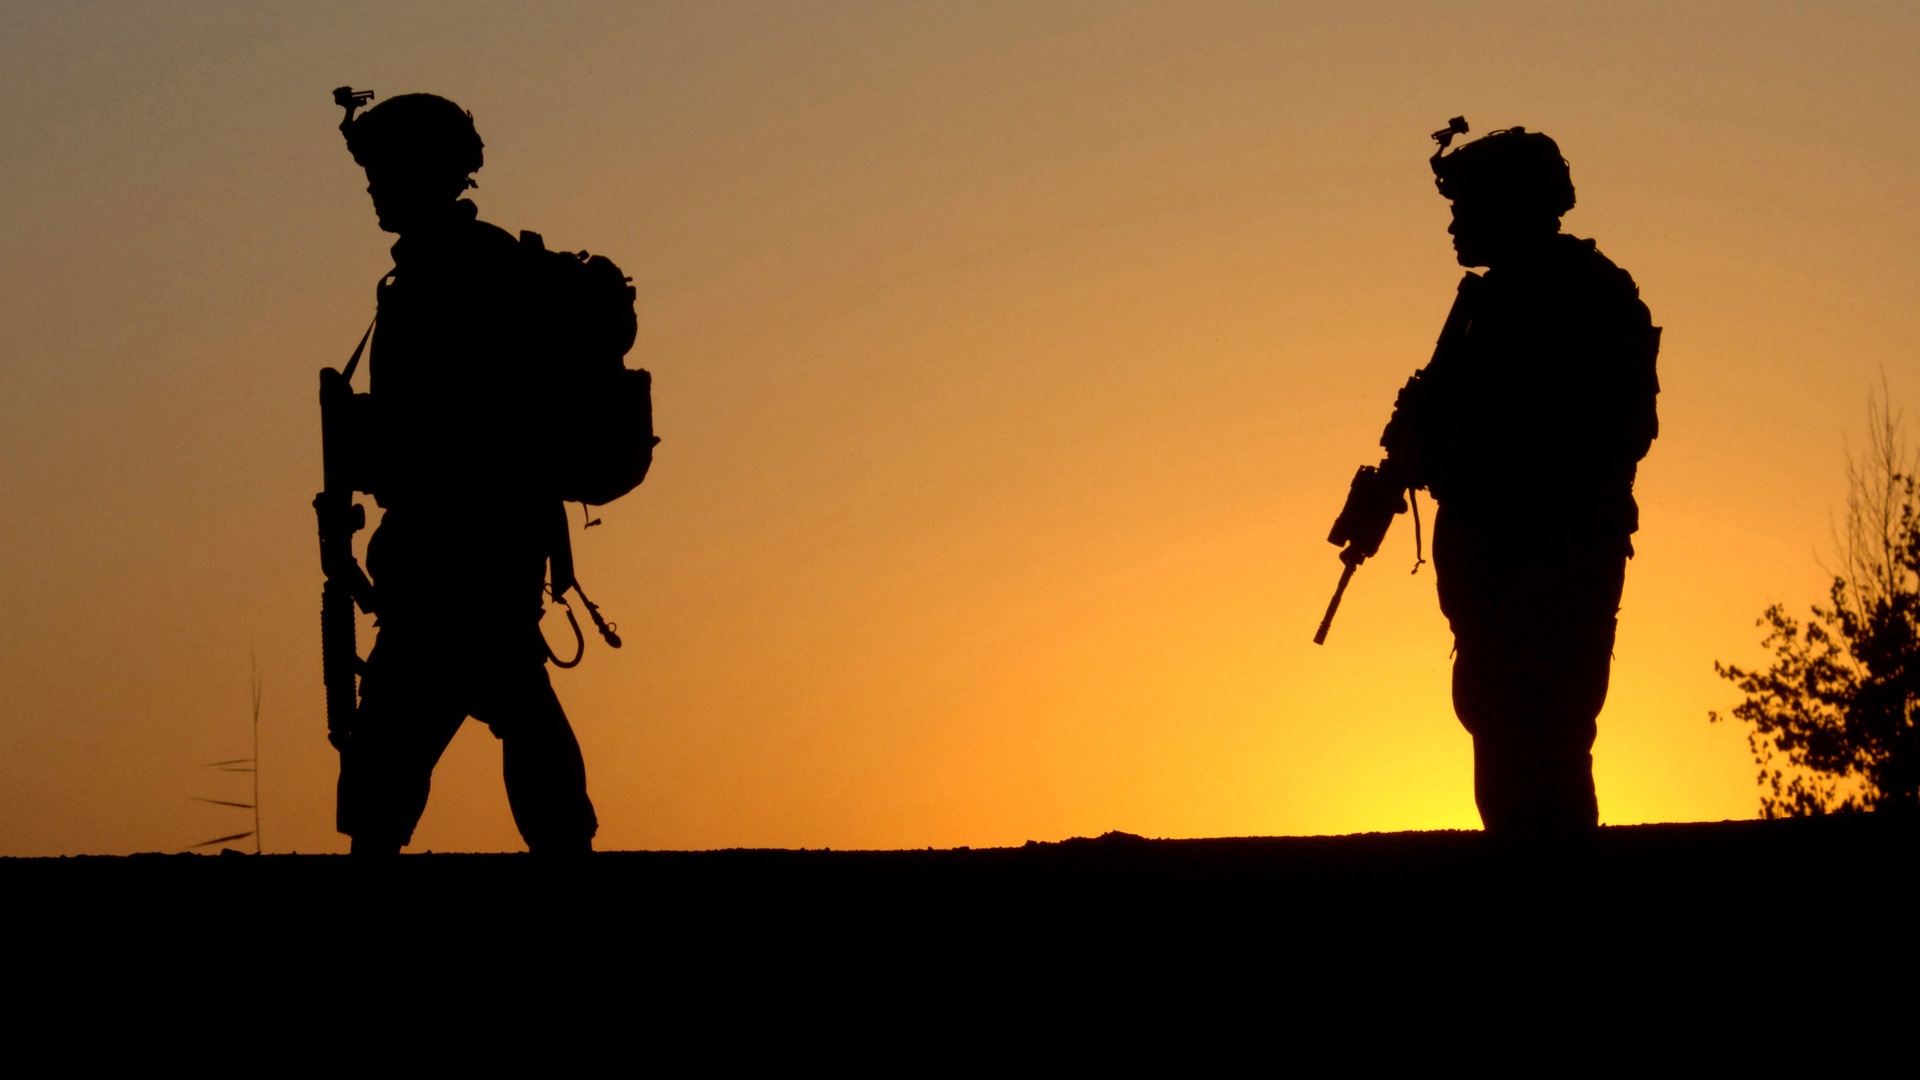 Soldiers At Iraq - New Wallpaper Hd Army , HD Wallpaper & Backgrounds